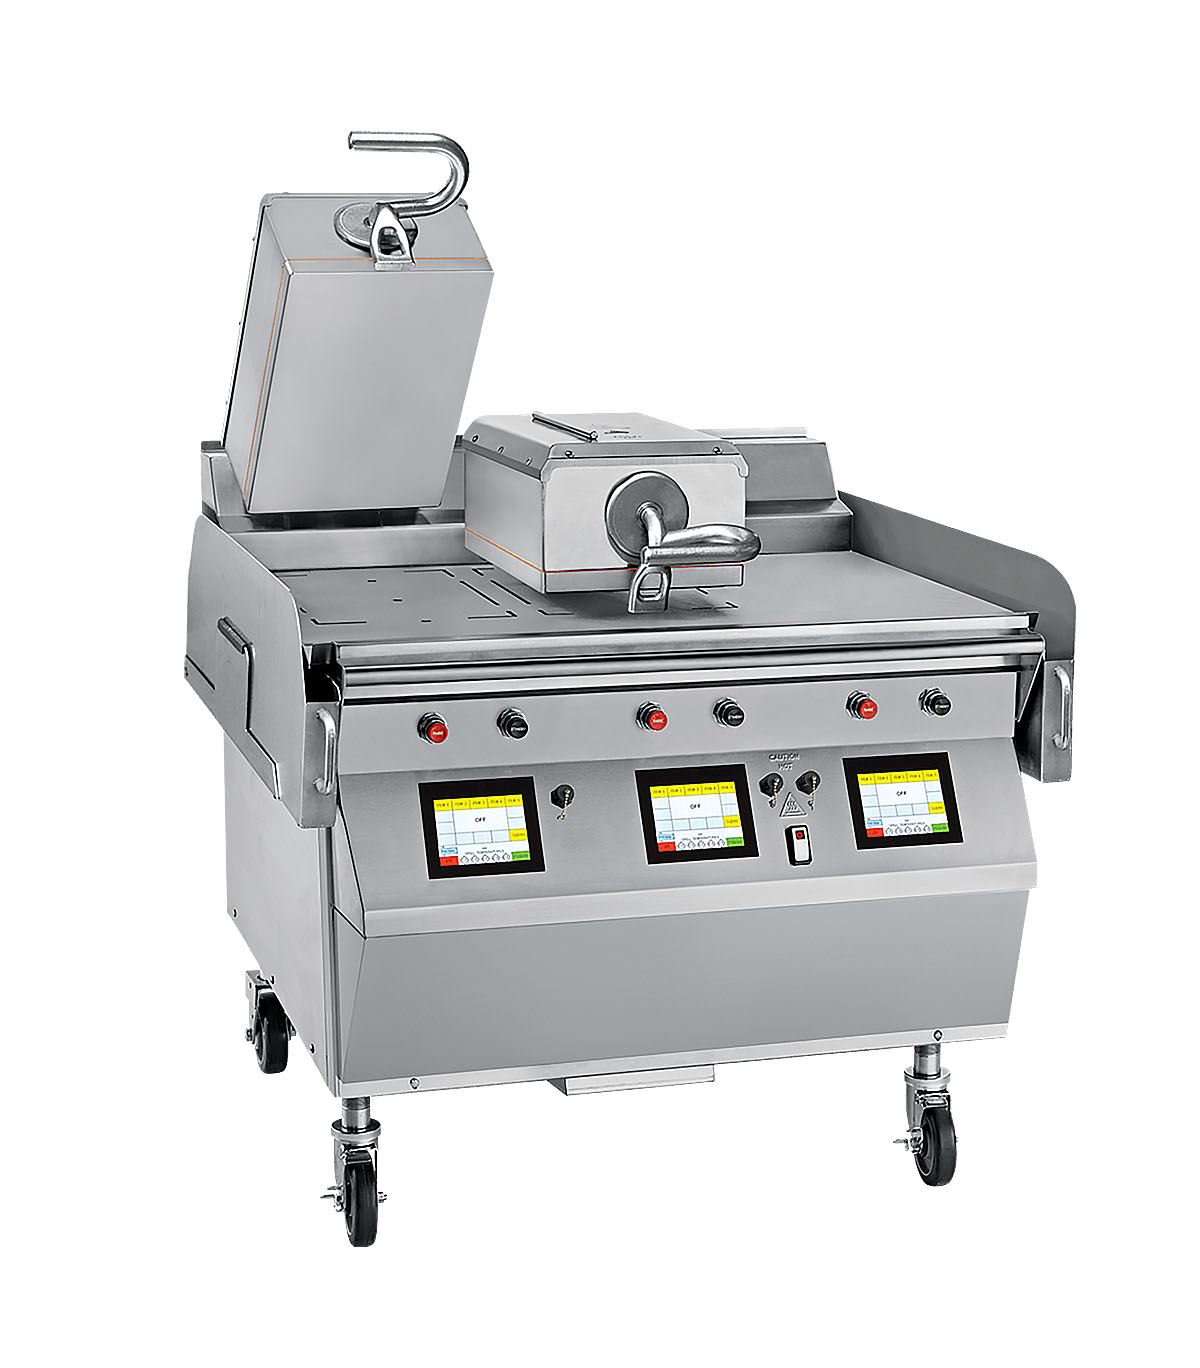 Taylor L813 Commercial Clamshell Grill